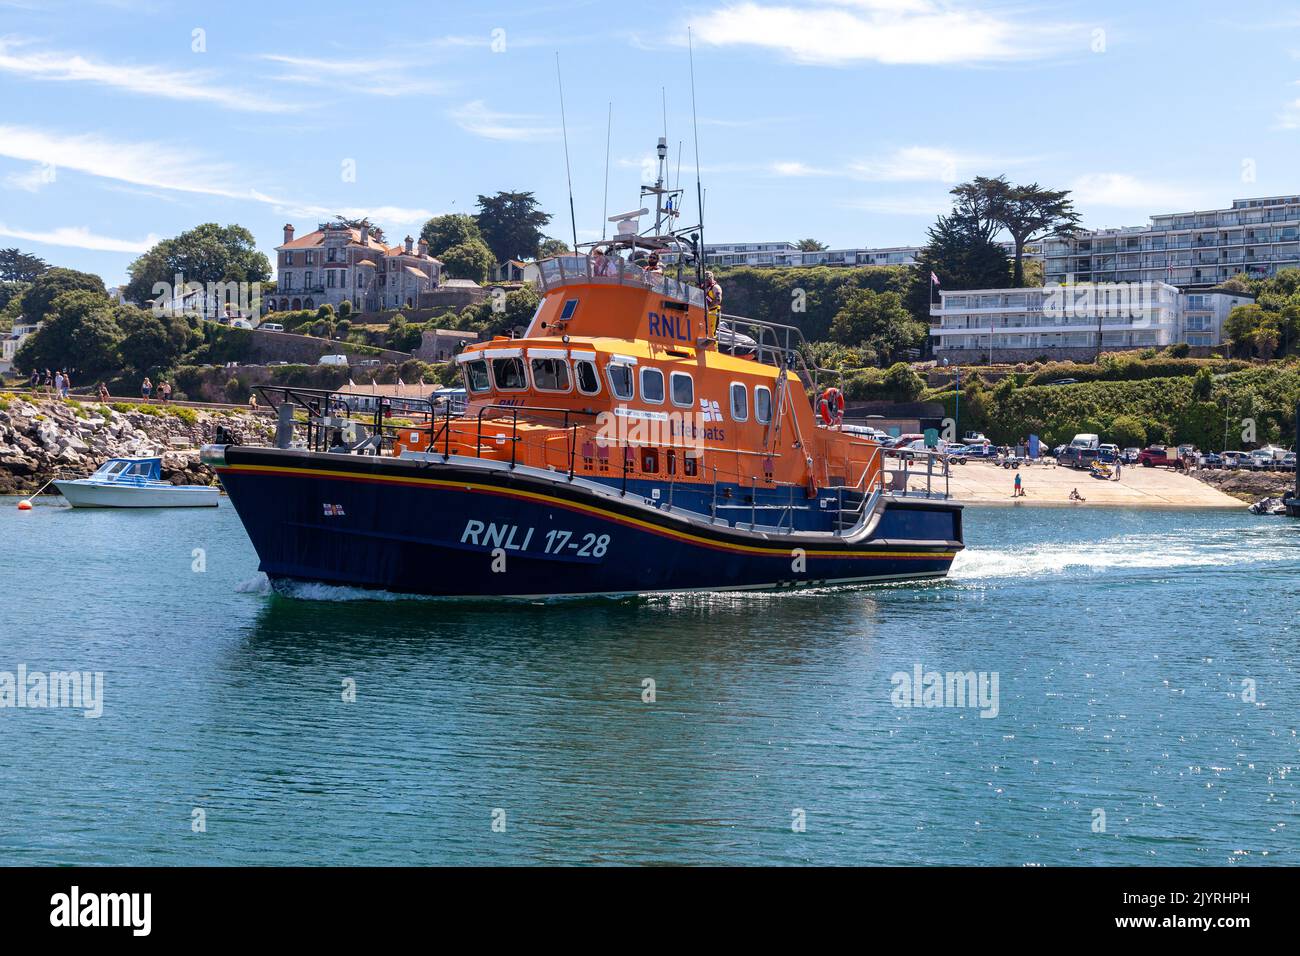 RNLI 17-28 all weather lifeboat in Brixham harbour Stock Photo